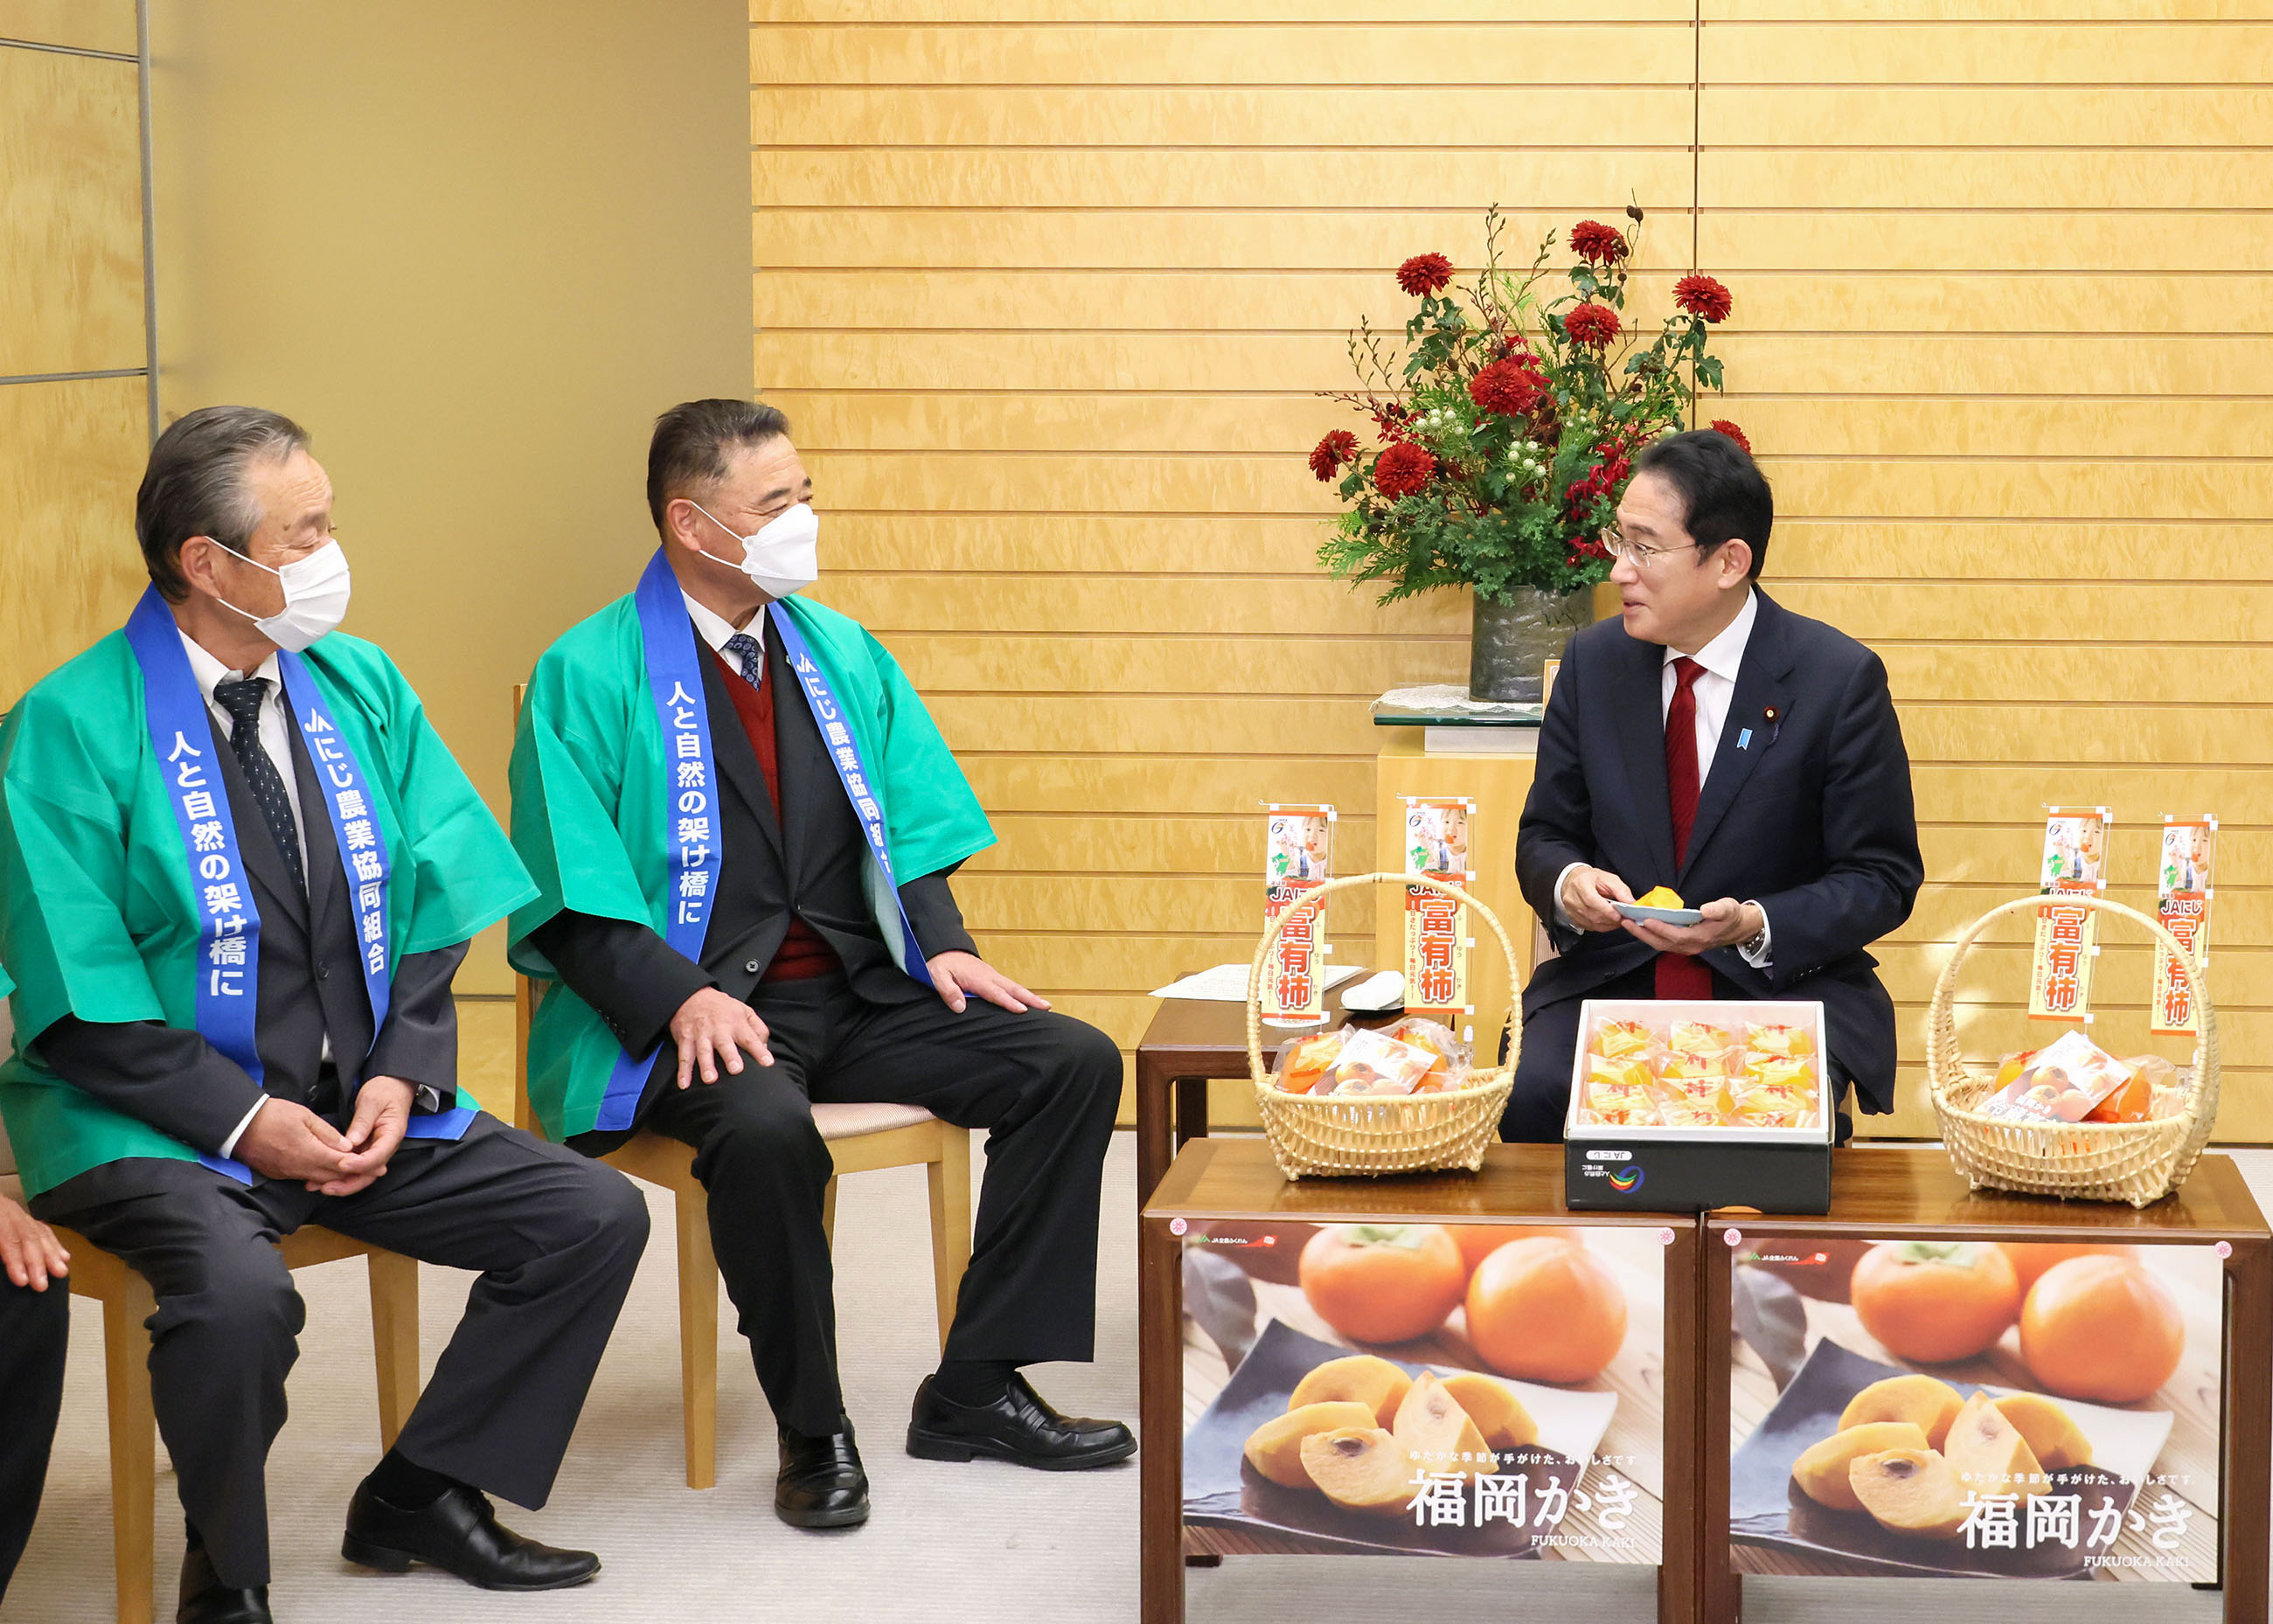 Prime Minister Kishida being presented with persimmons (5)